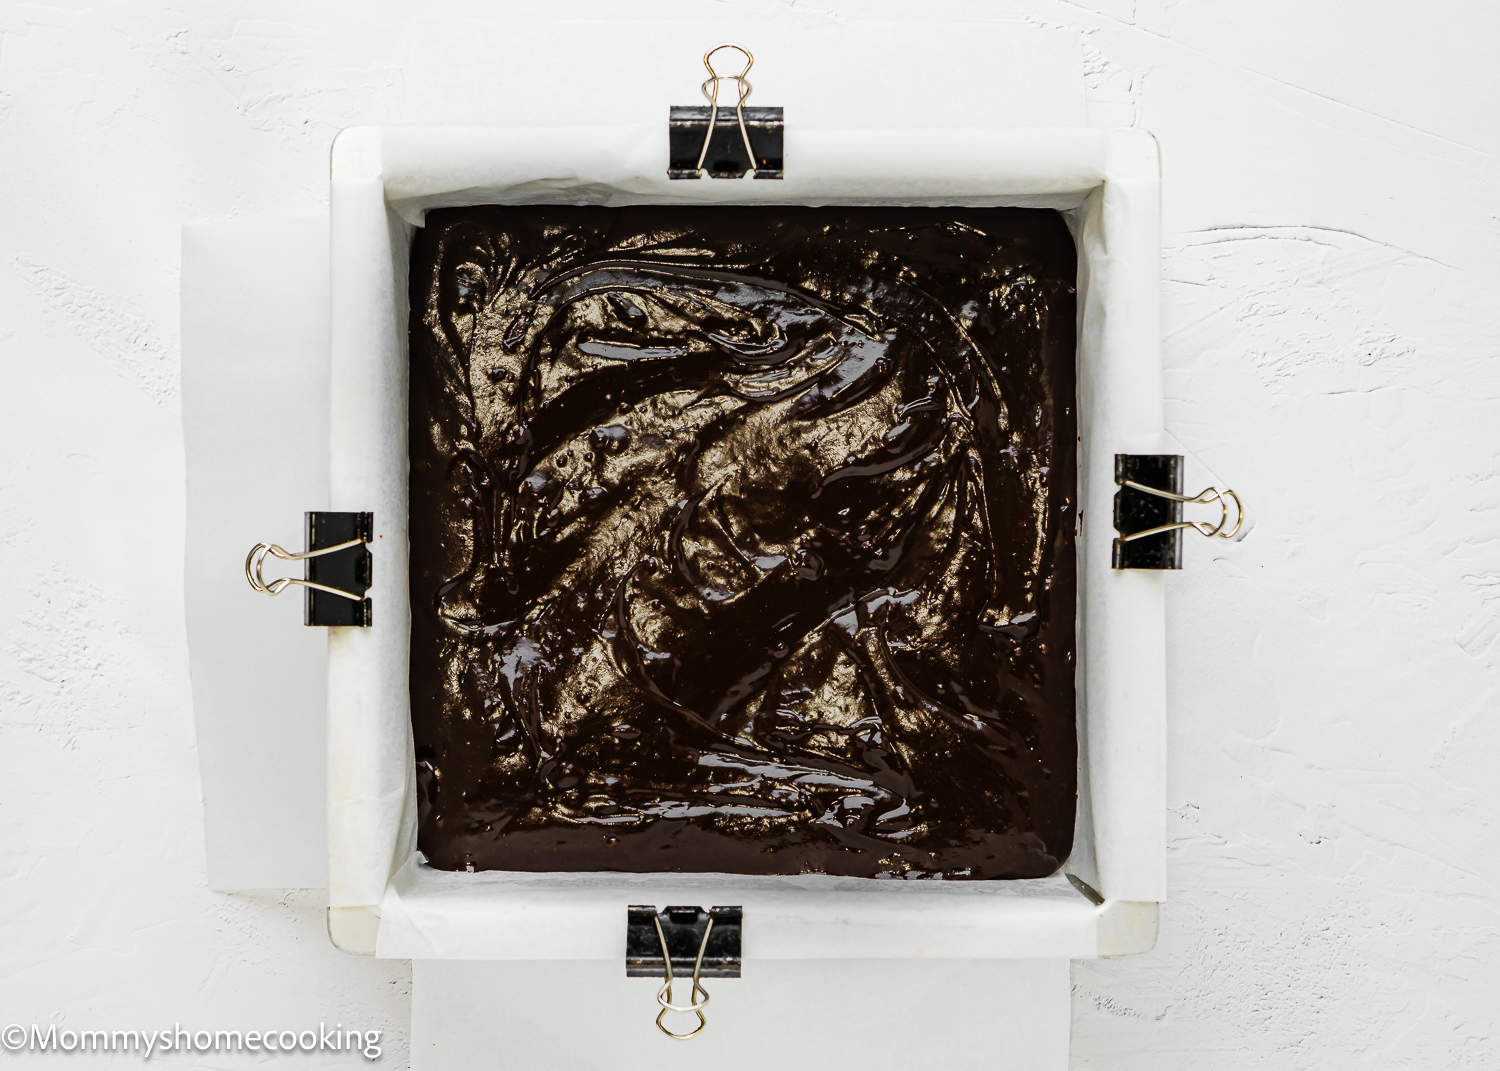 egg-free brownie batter in a square baking pan.